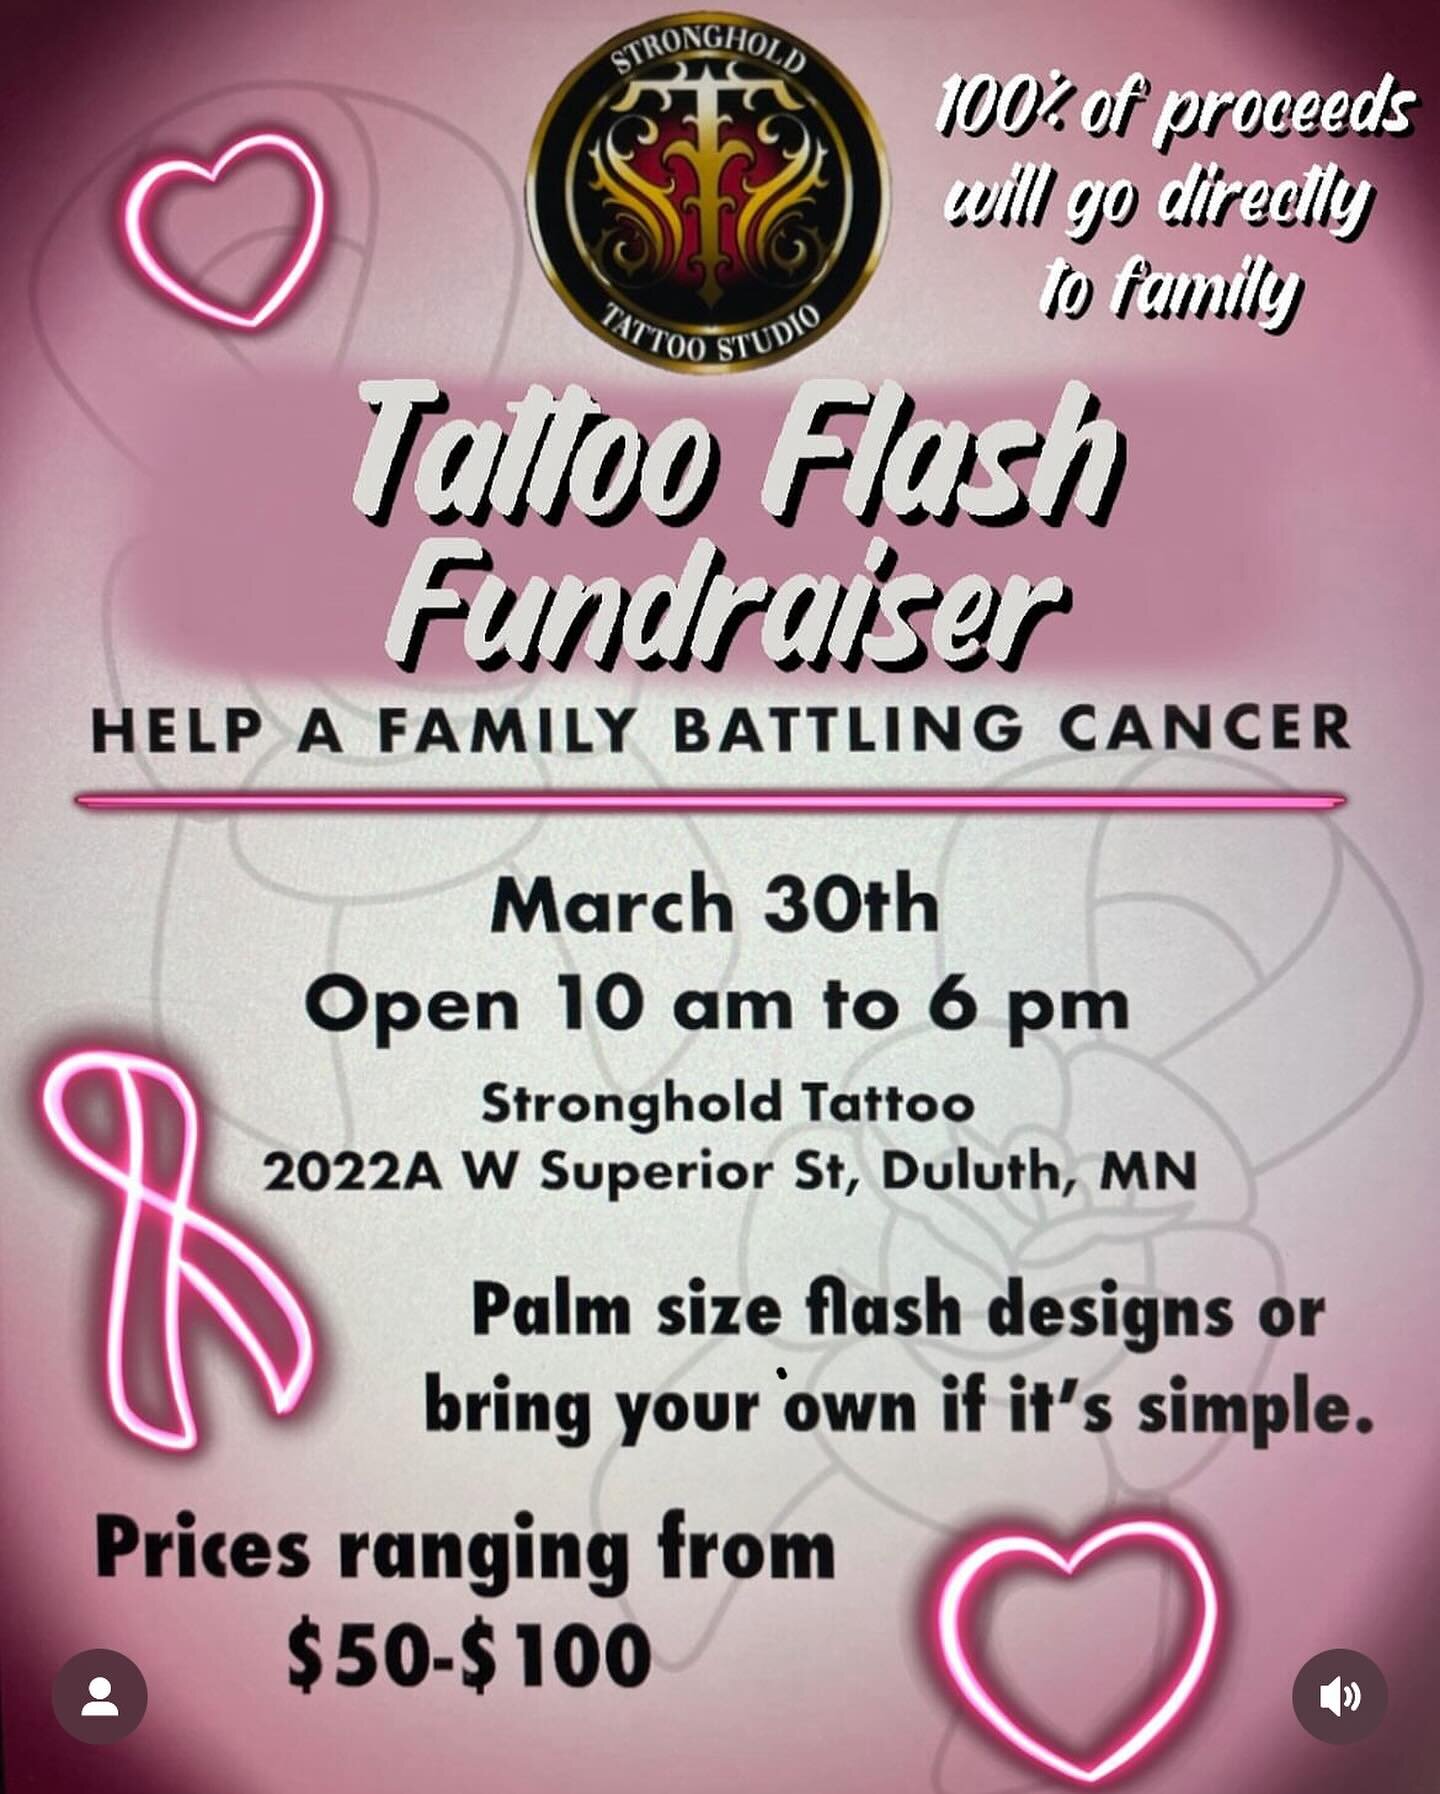 Join us on march 30th for a flash event to support a great cause